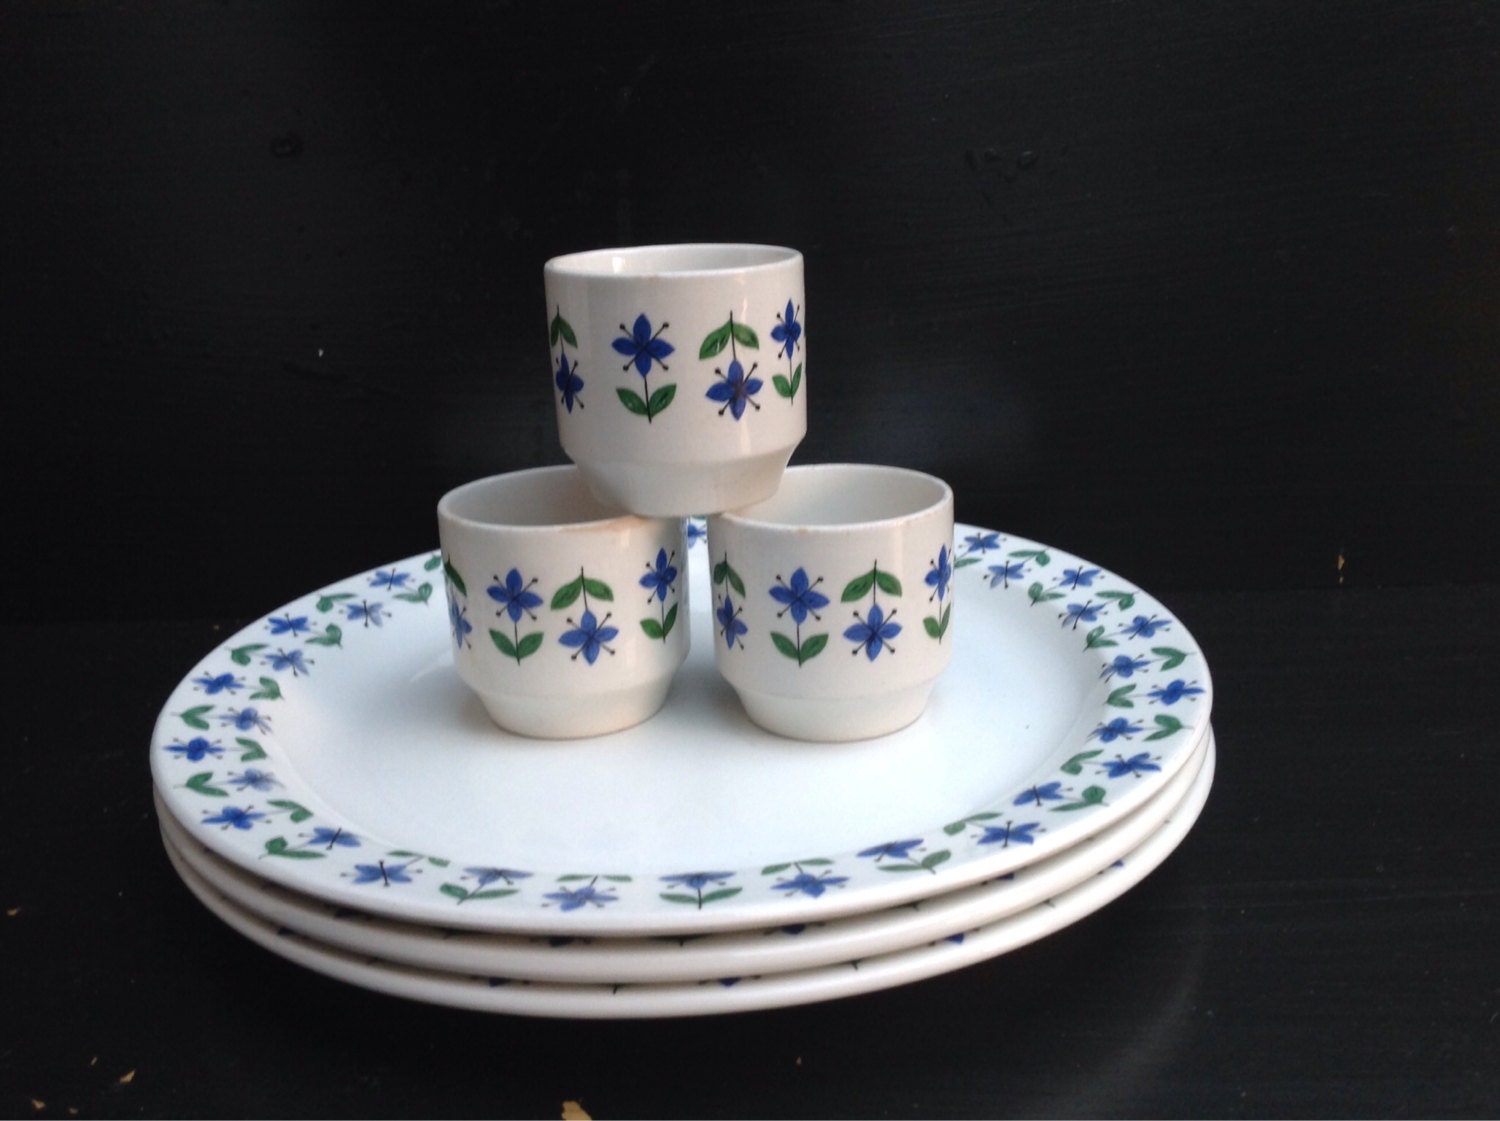 Midwinter Roselle set of Three Egg cups and Plates1960’s Retro 